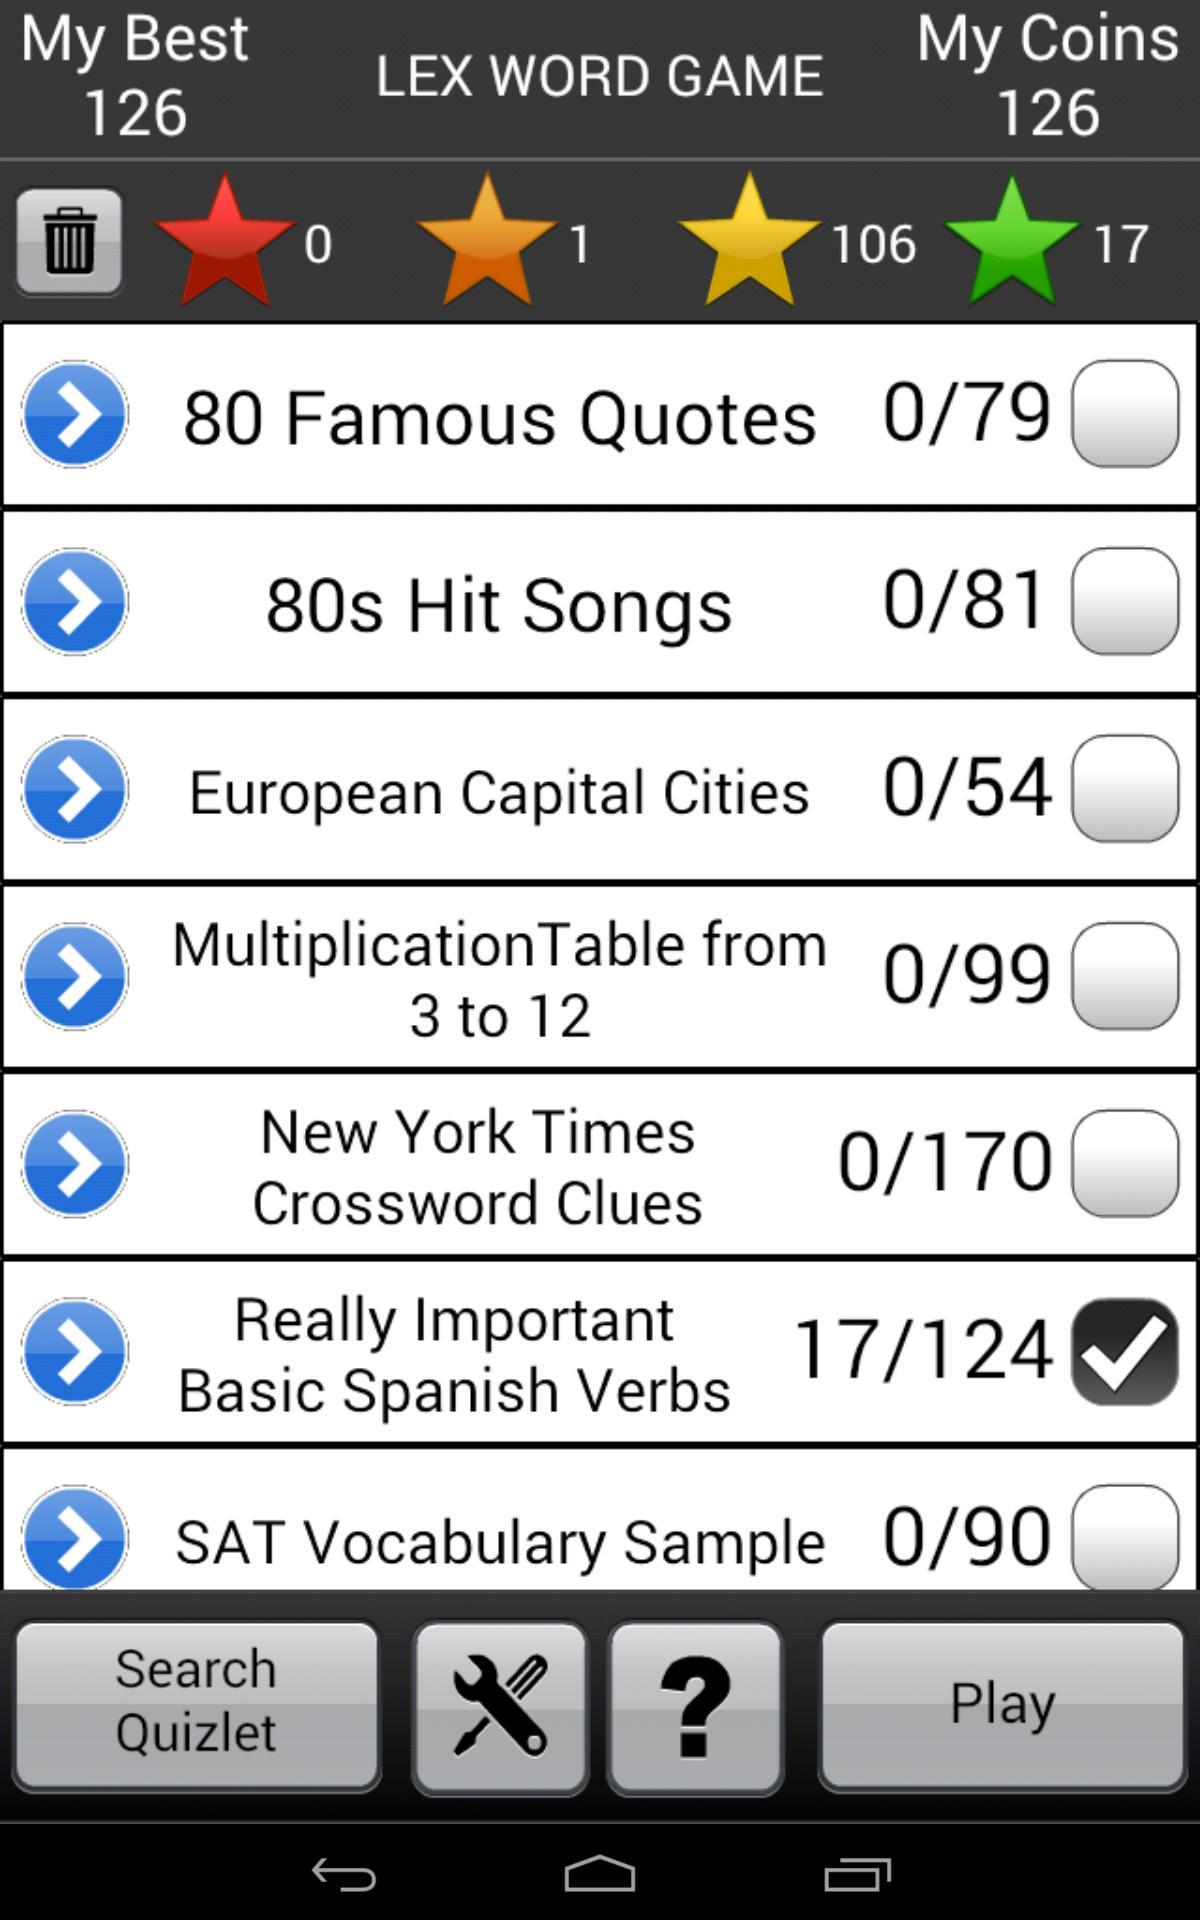 Lex Flashcard Game For Quizlet For Android - Apk Download